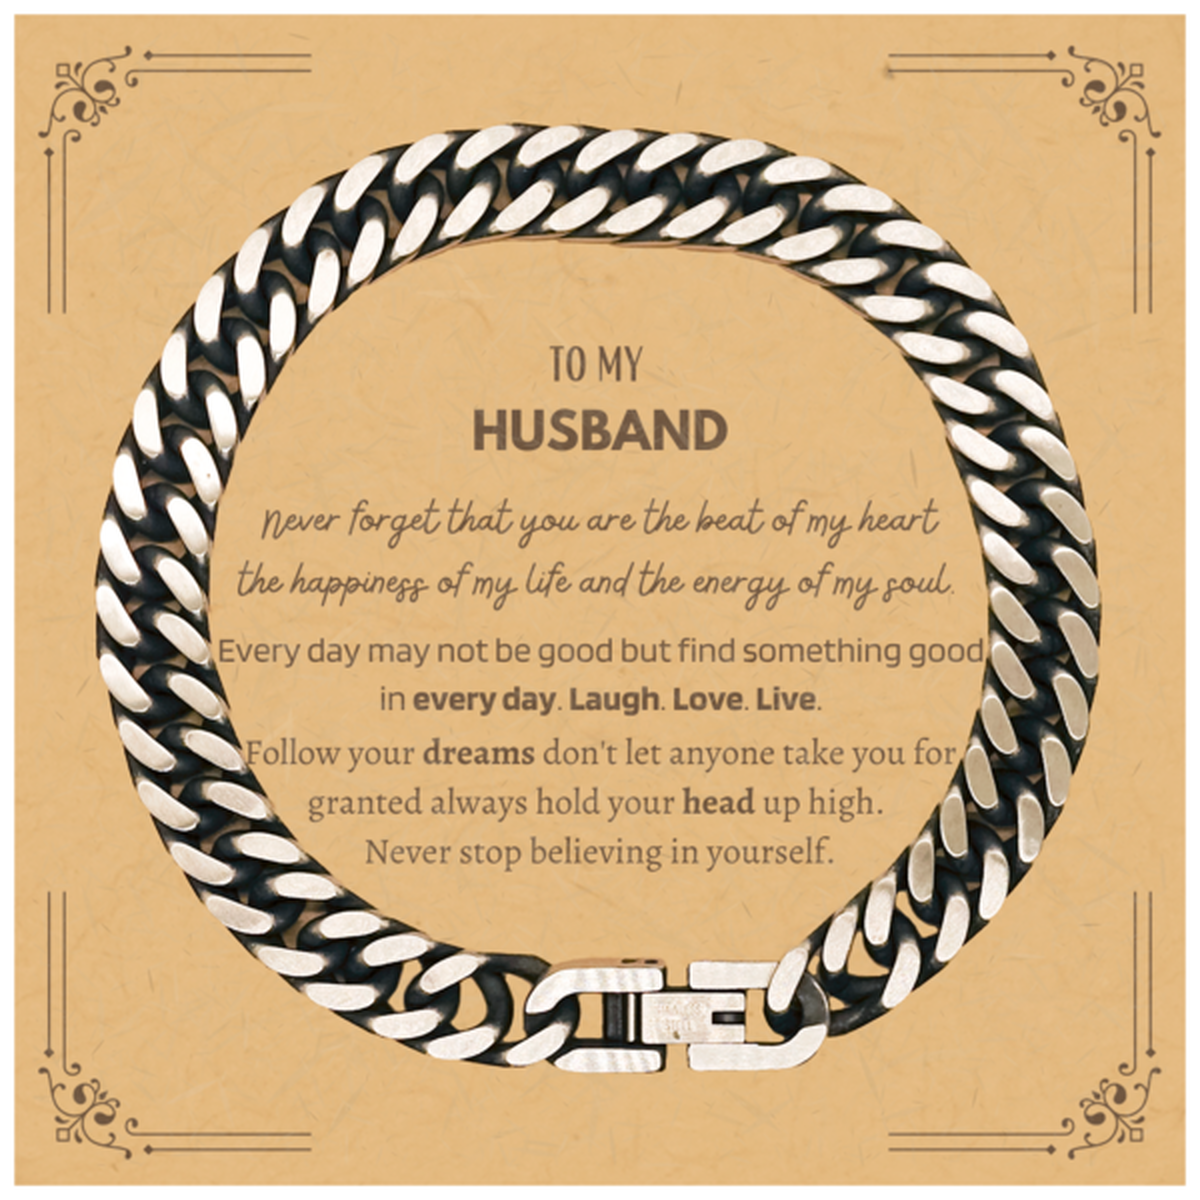 To My Husband Message Card Gifts, Christmas Husband Cuban Link Chain Bracelet Present, Birthday Unique Motivational For Husband, To My Husband Never forget that you are the beat of my heart the happiness of my life and the energy of my soul